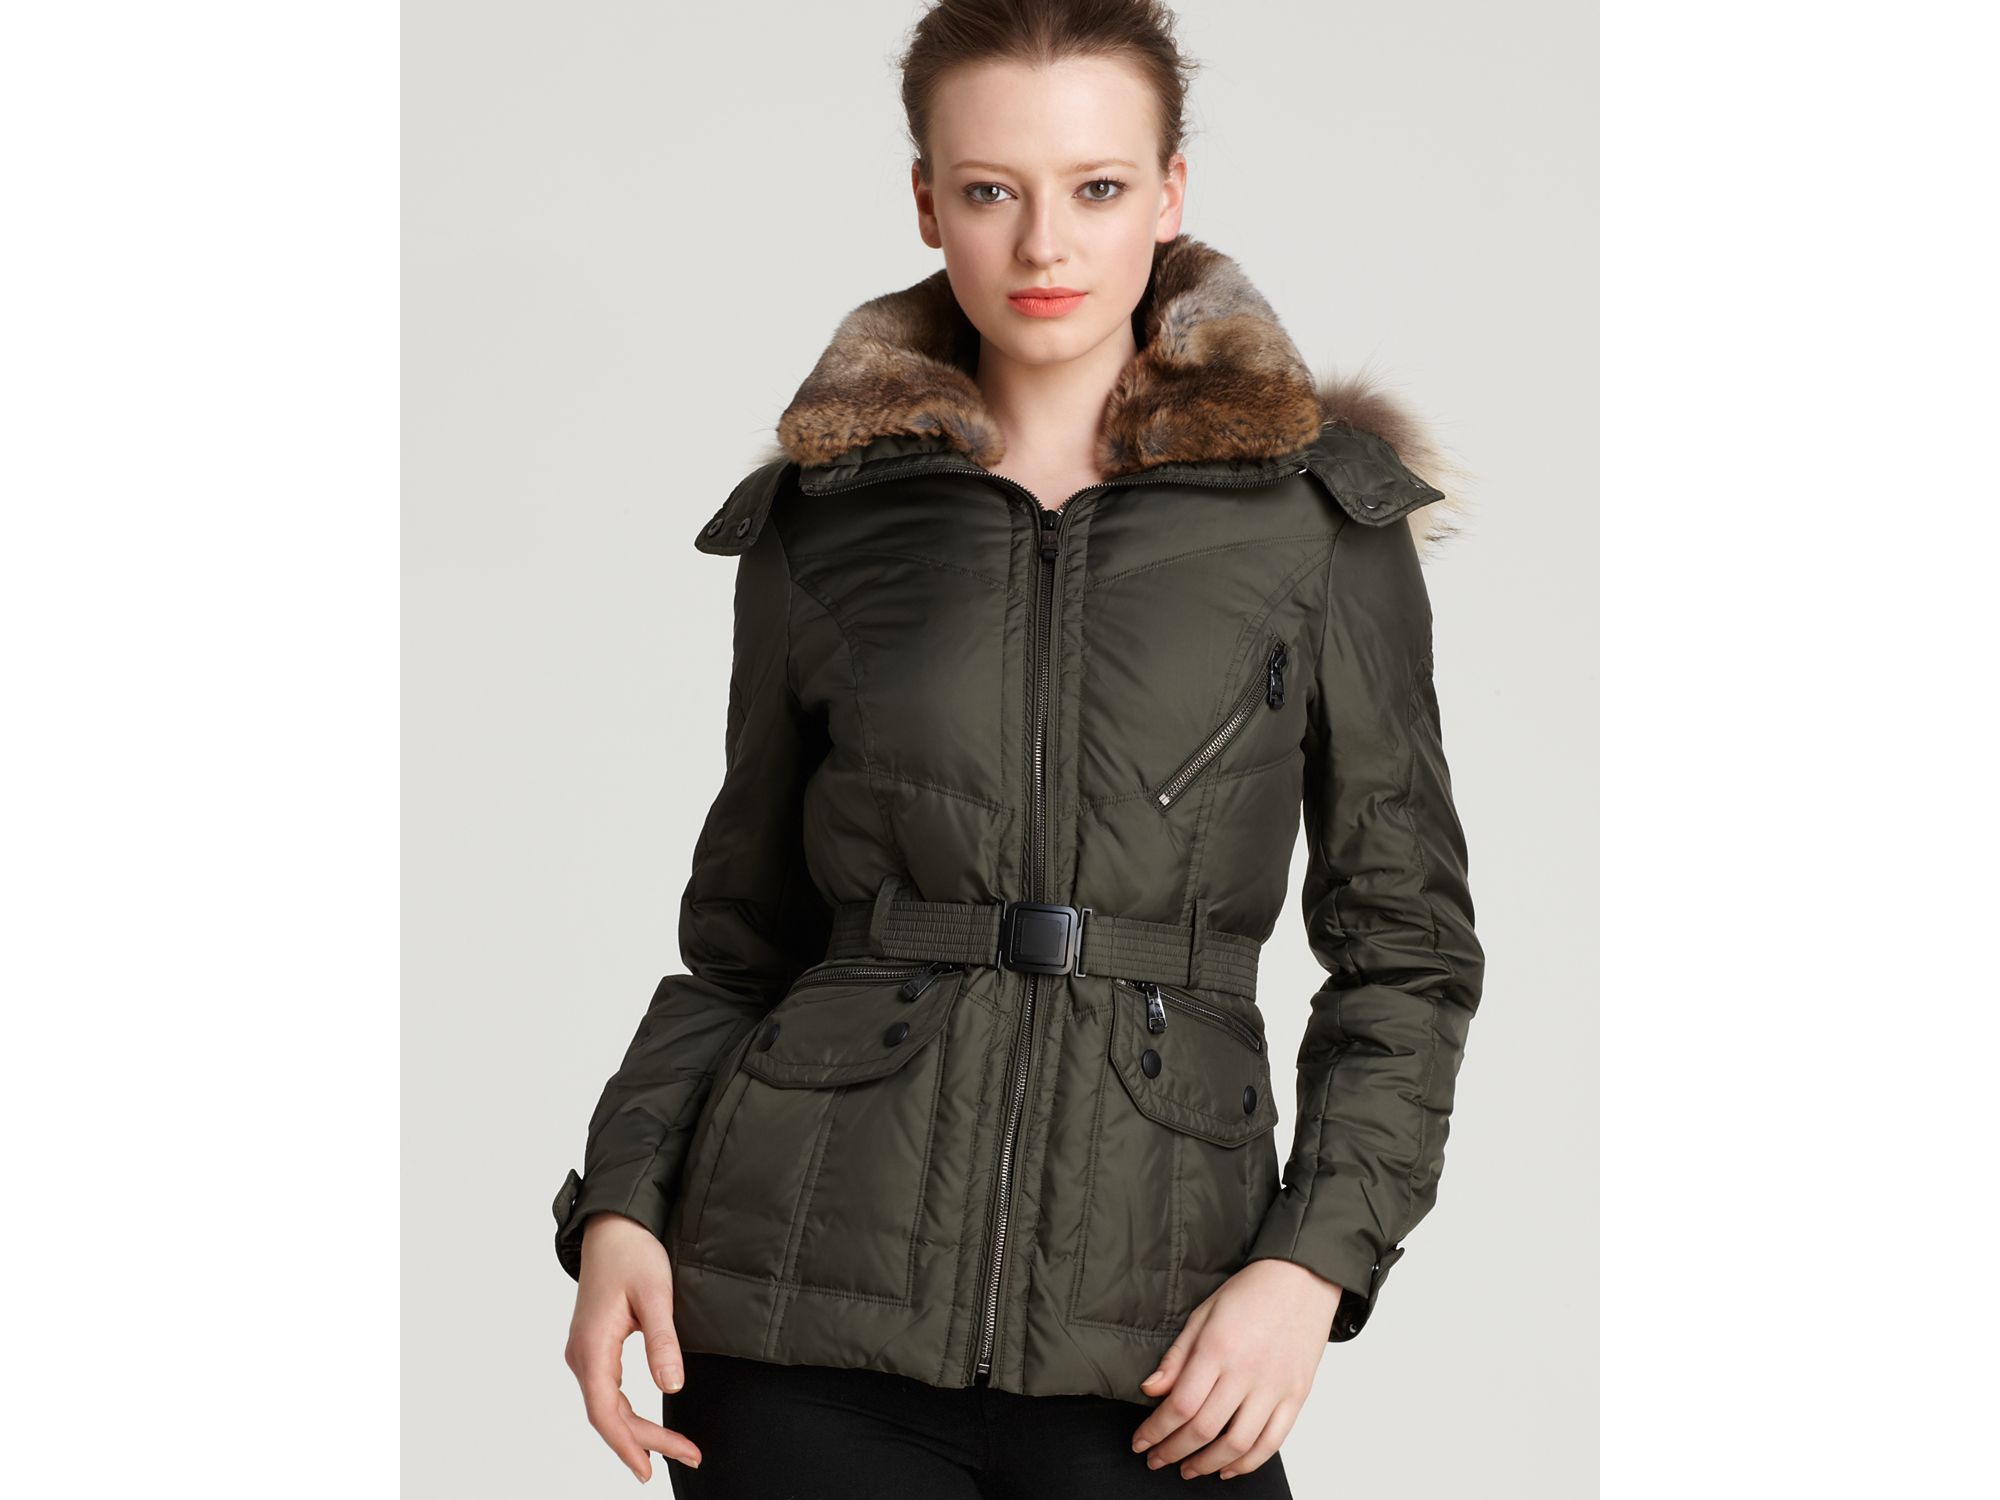 Lyst - Andrew marc Fur Trimmed Belted Puffer Jacket in Green